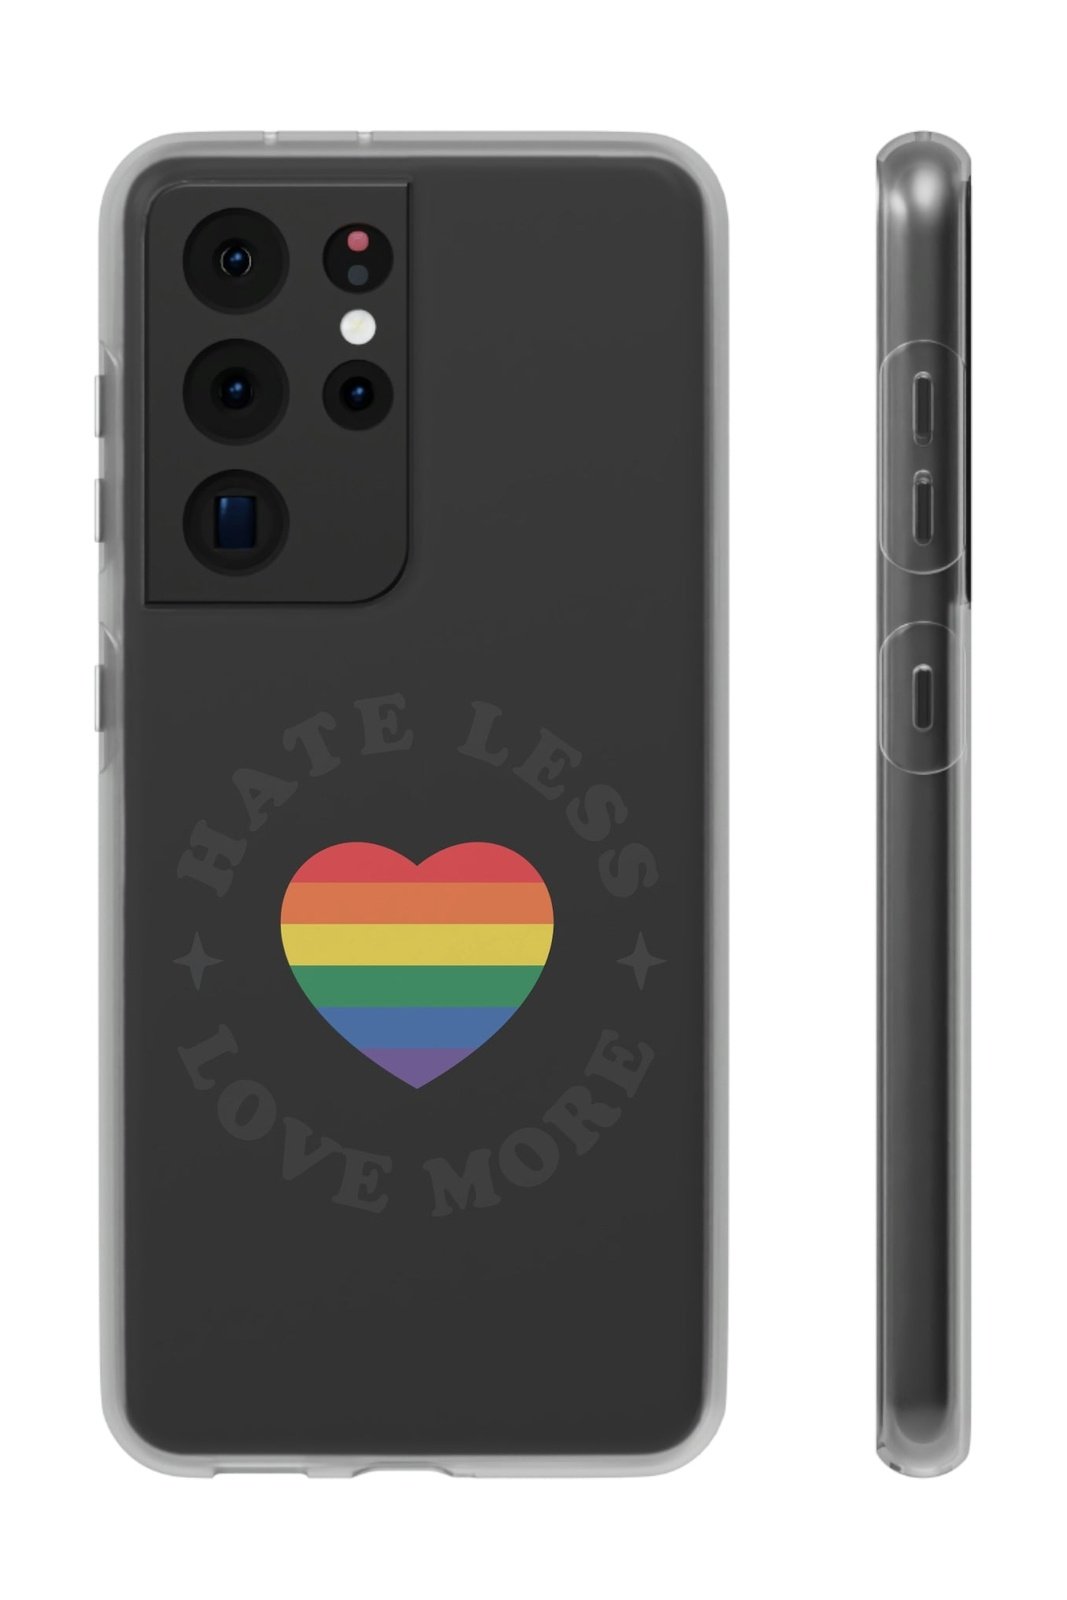 Hate Less Love More Flexi Phone Cases